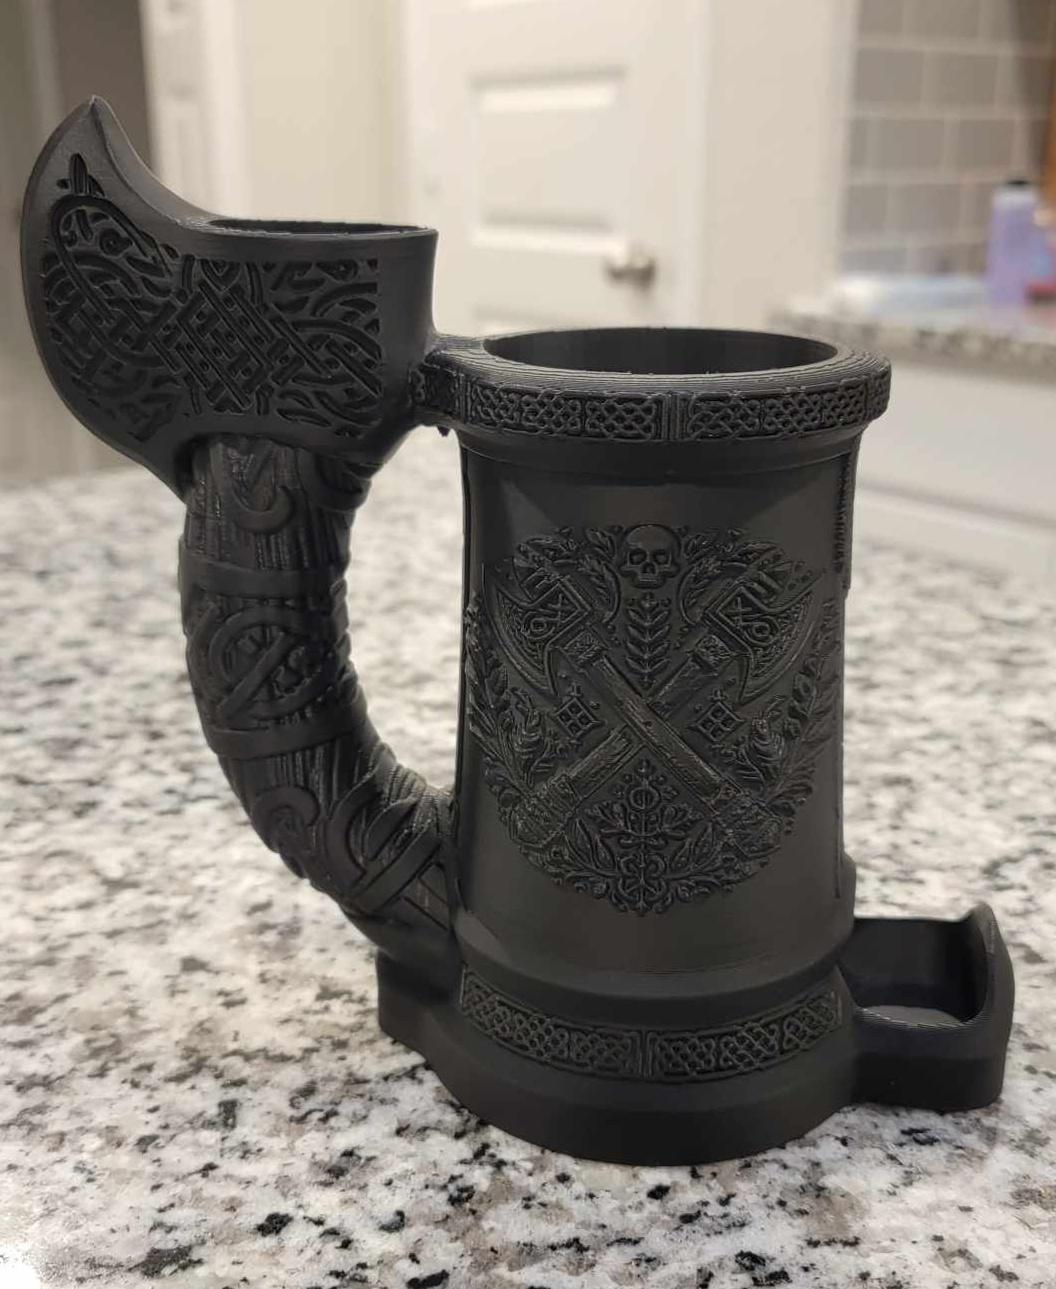 AX Handle Dice Tower can Cozy - These are so frickin' cool! I printed the Dwarven Axe one last night at .2mm layer height with 20% infill and no supports. There is some slight sagging on the underside of the axe handle and between where the axe meets the lip of the cup. I'm going to print it again with variable layer height and supports on critical regions only to see how it turns out.

I would love to see a Druidic/Nature one in the future if you're open to suggestions, like a tree stump covered in mushrooms. - 3d model